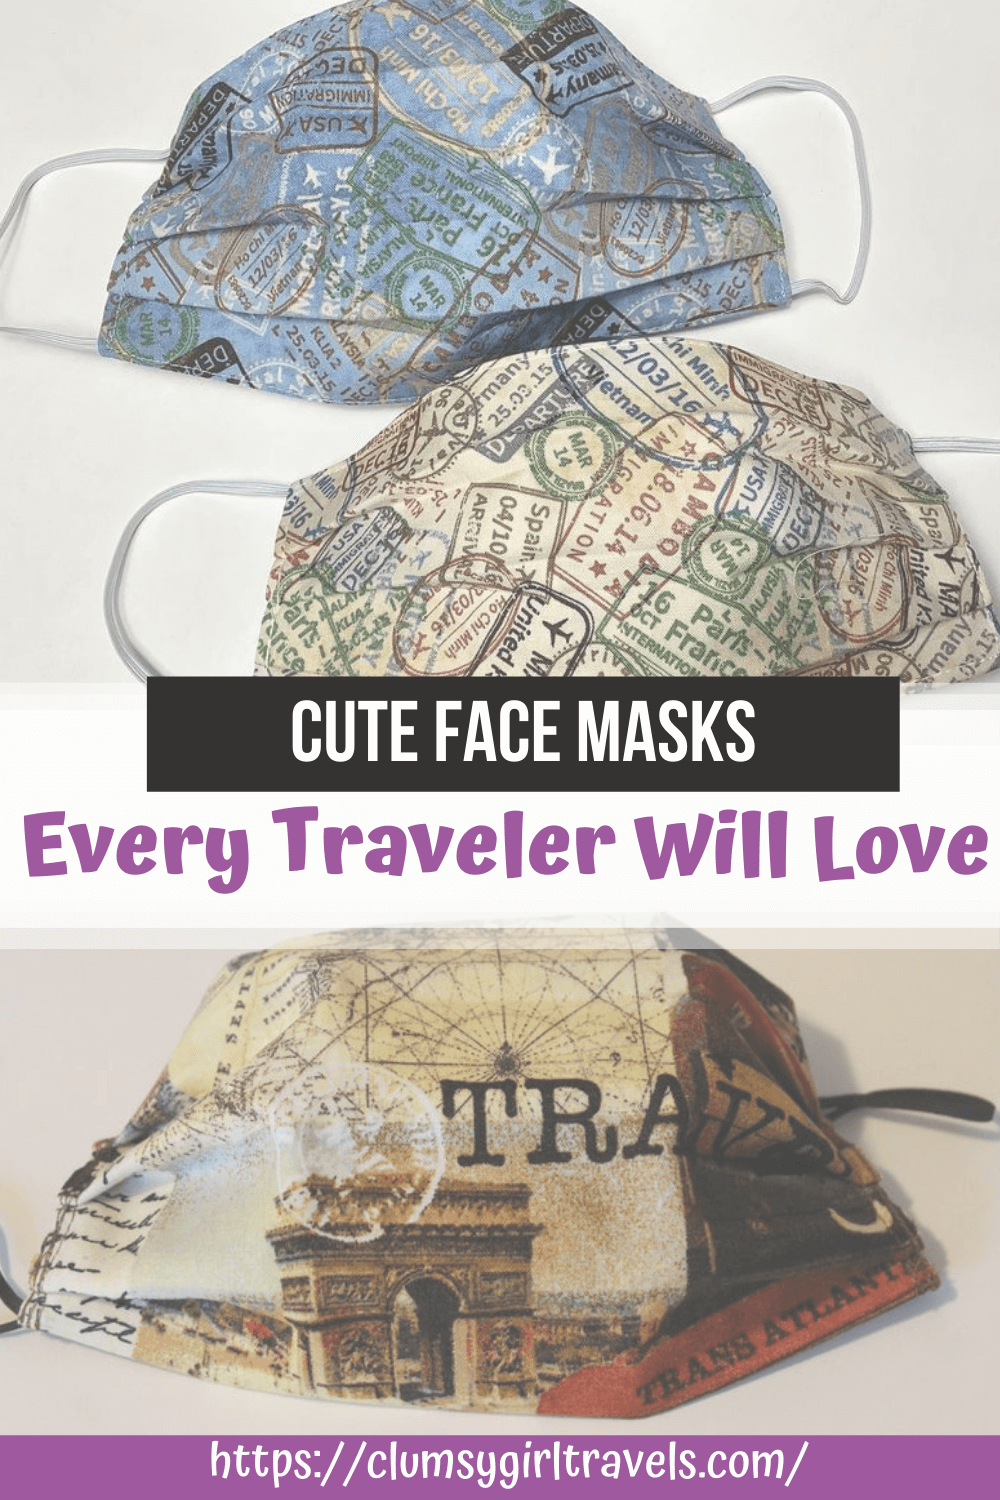 Finding cute face masks is a must in todays day and age. This guide will help those wanderlusting souls find the perfect face mask.